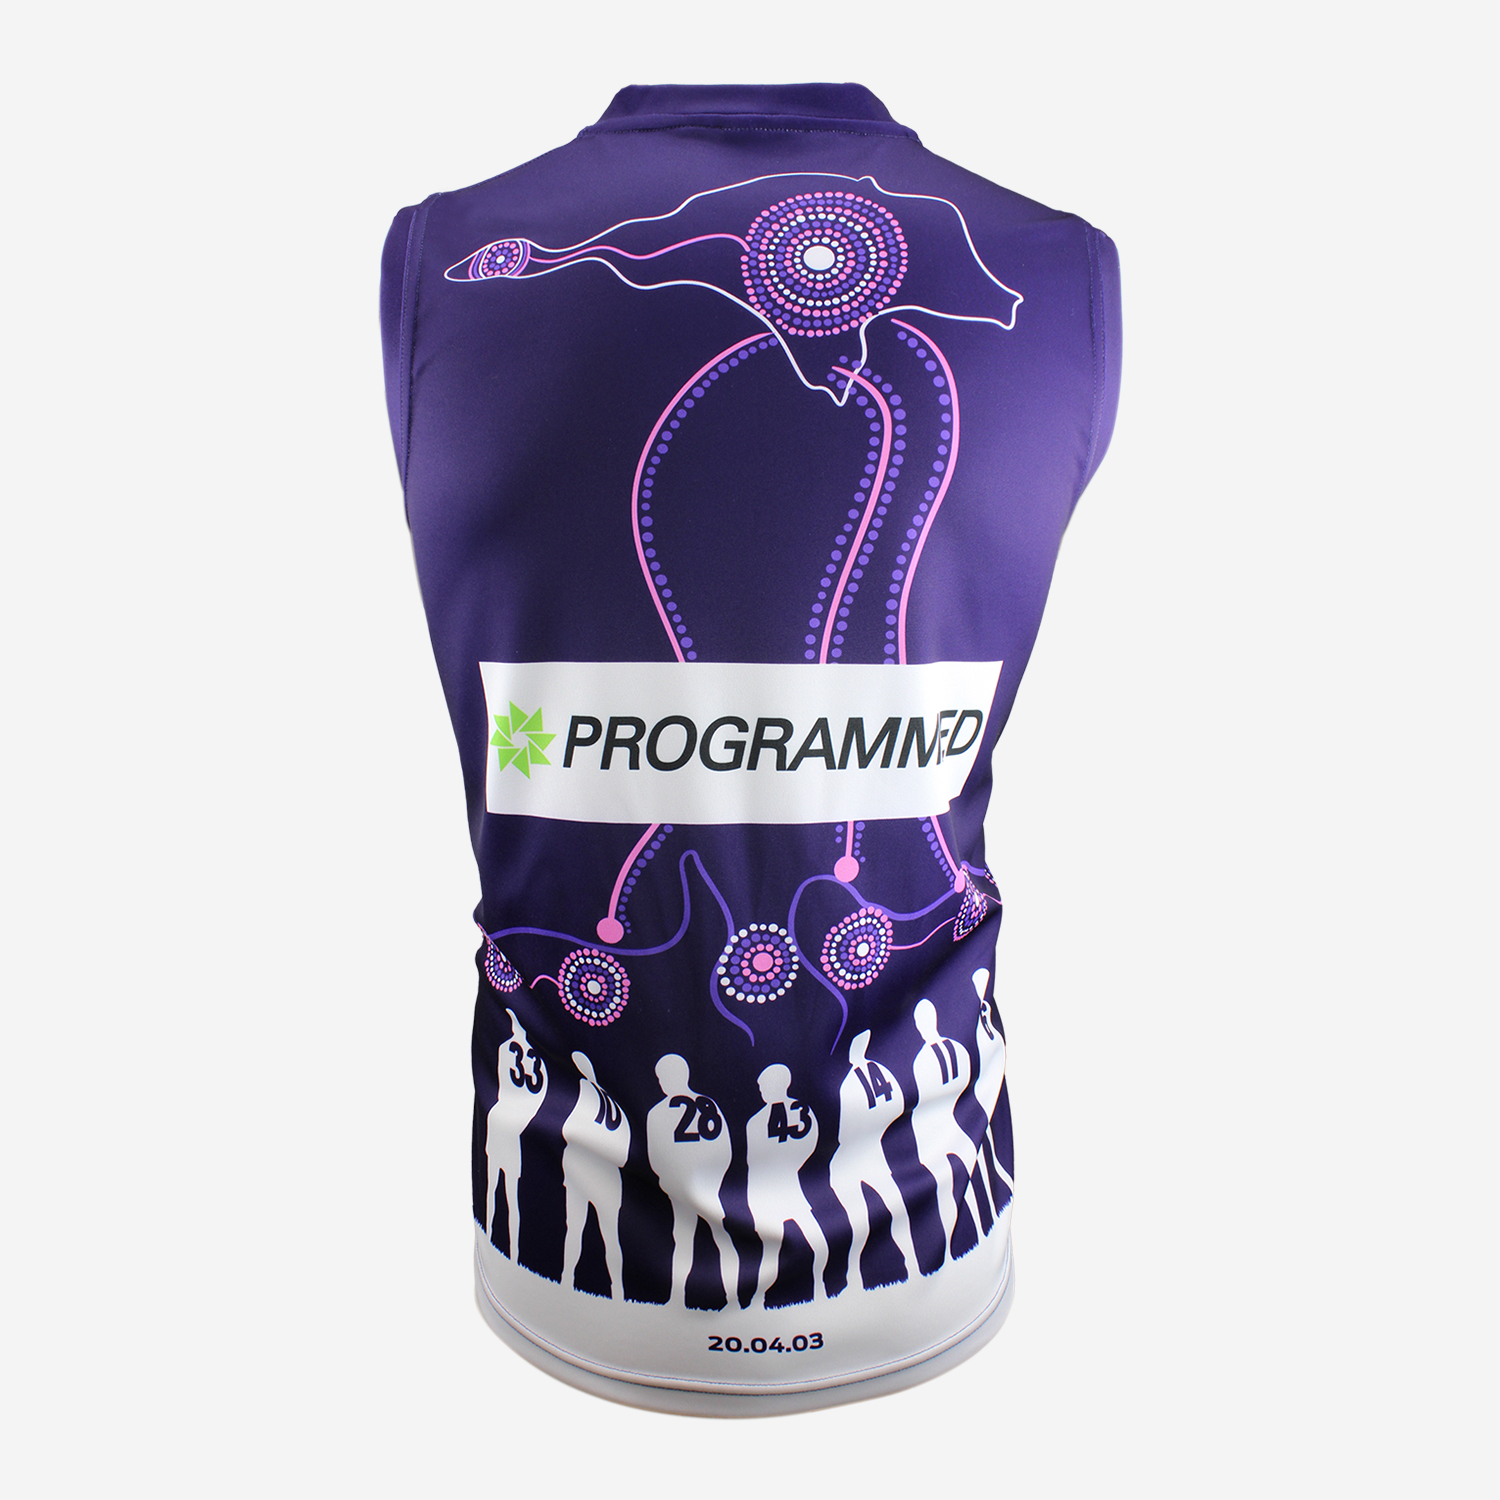 Youth's Indigenous Fremantle Replica Guernsey